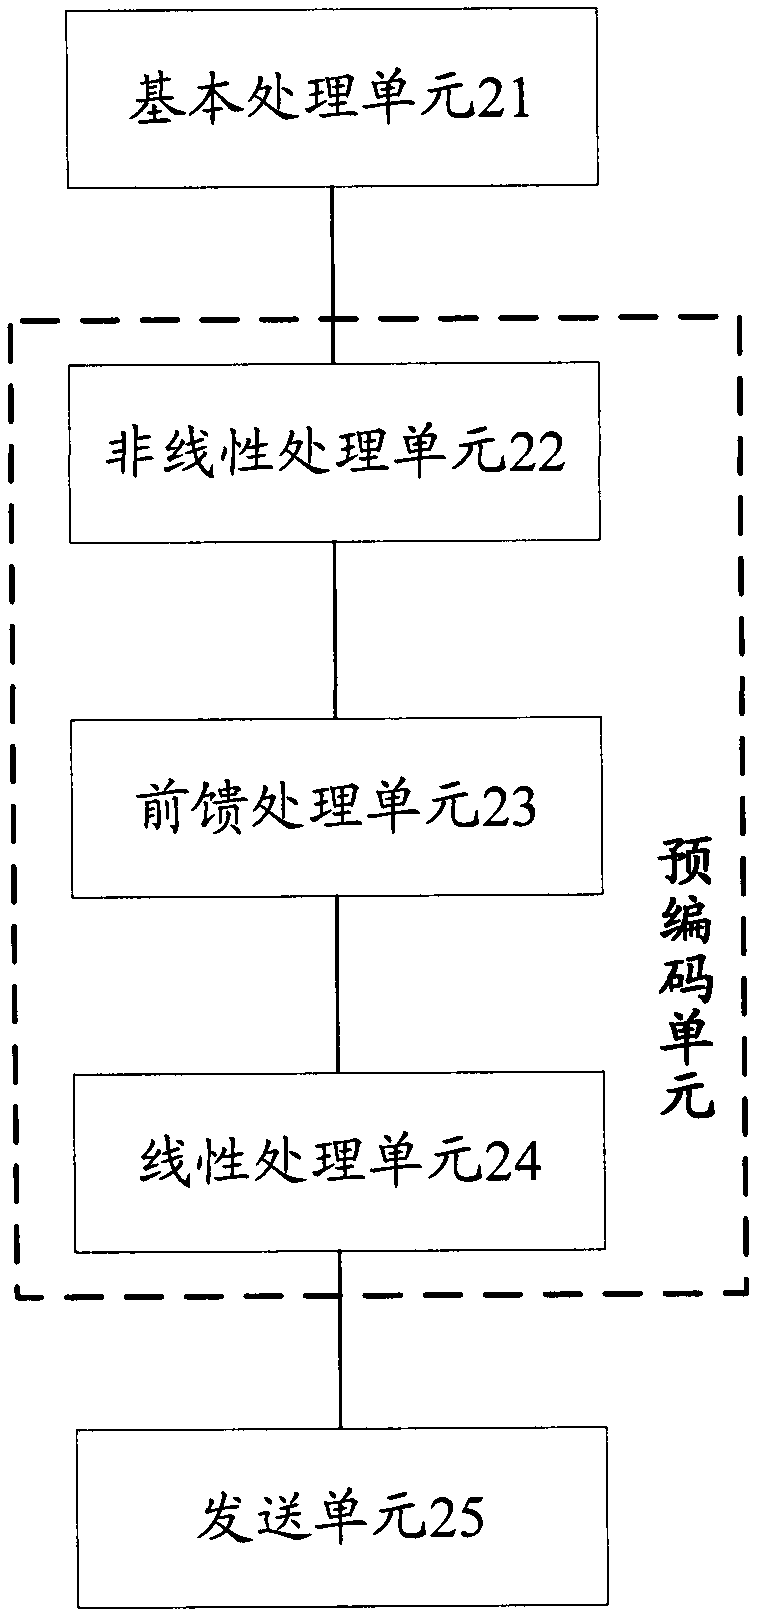 Linear and nonlinear comprehensive precoding method and device for multi-user multiple-input multiple-output (MIMO) system